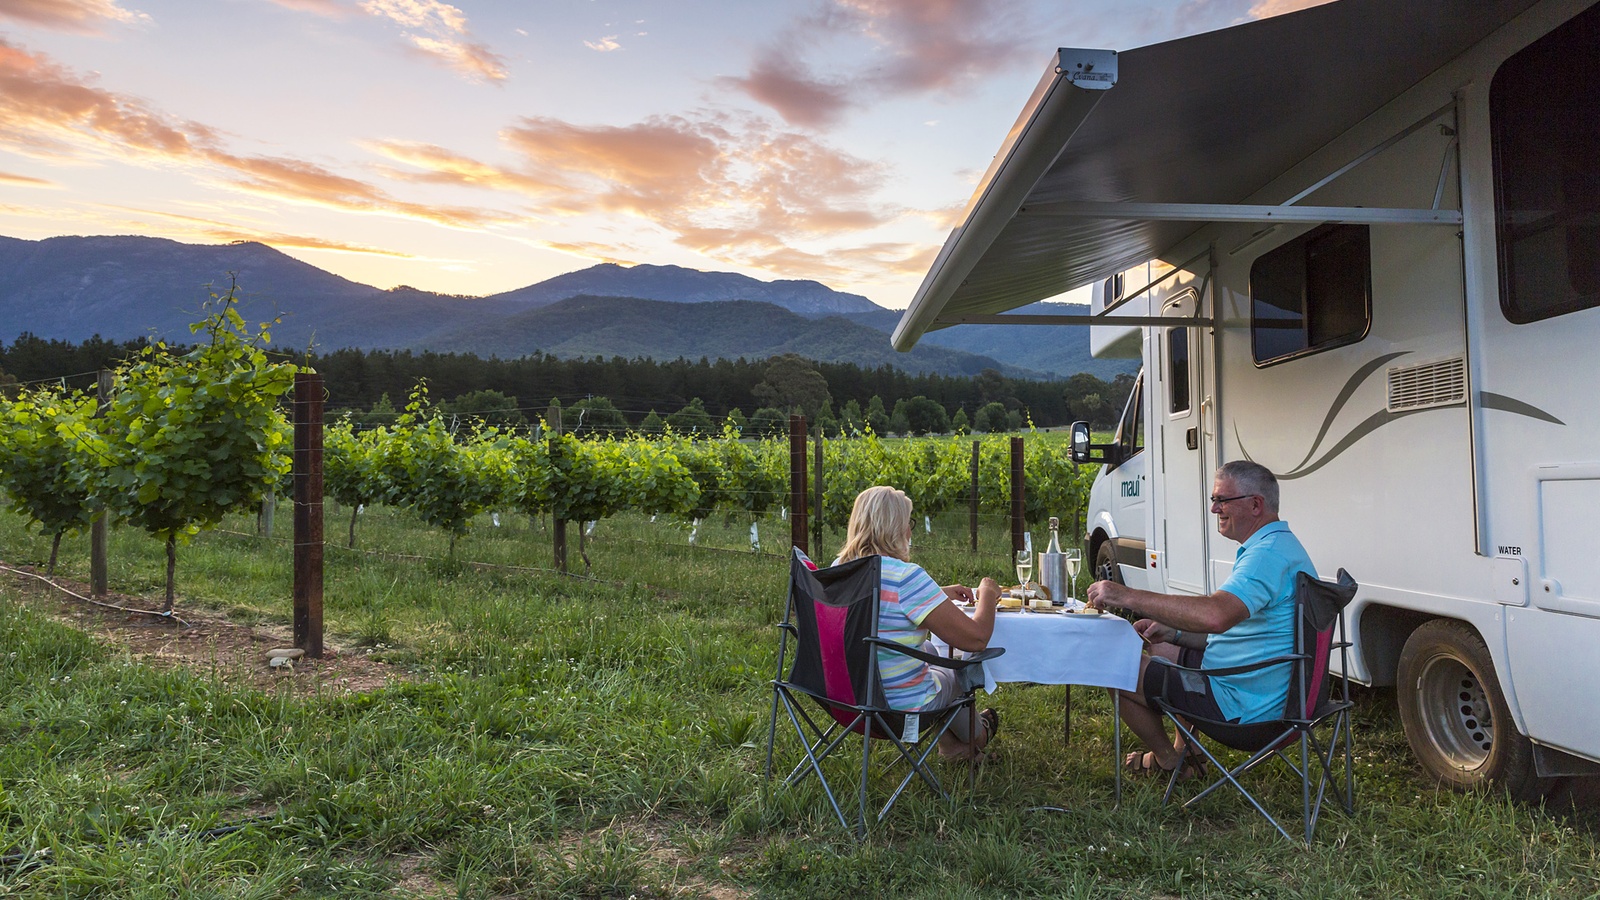 AU_NZ_Maui Winery Haven_Exterior Picnic Awning Sunset Vines Food Wine.jpg